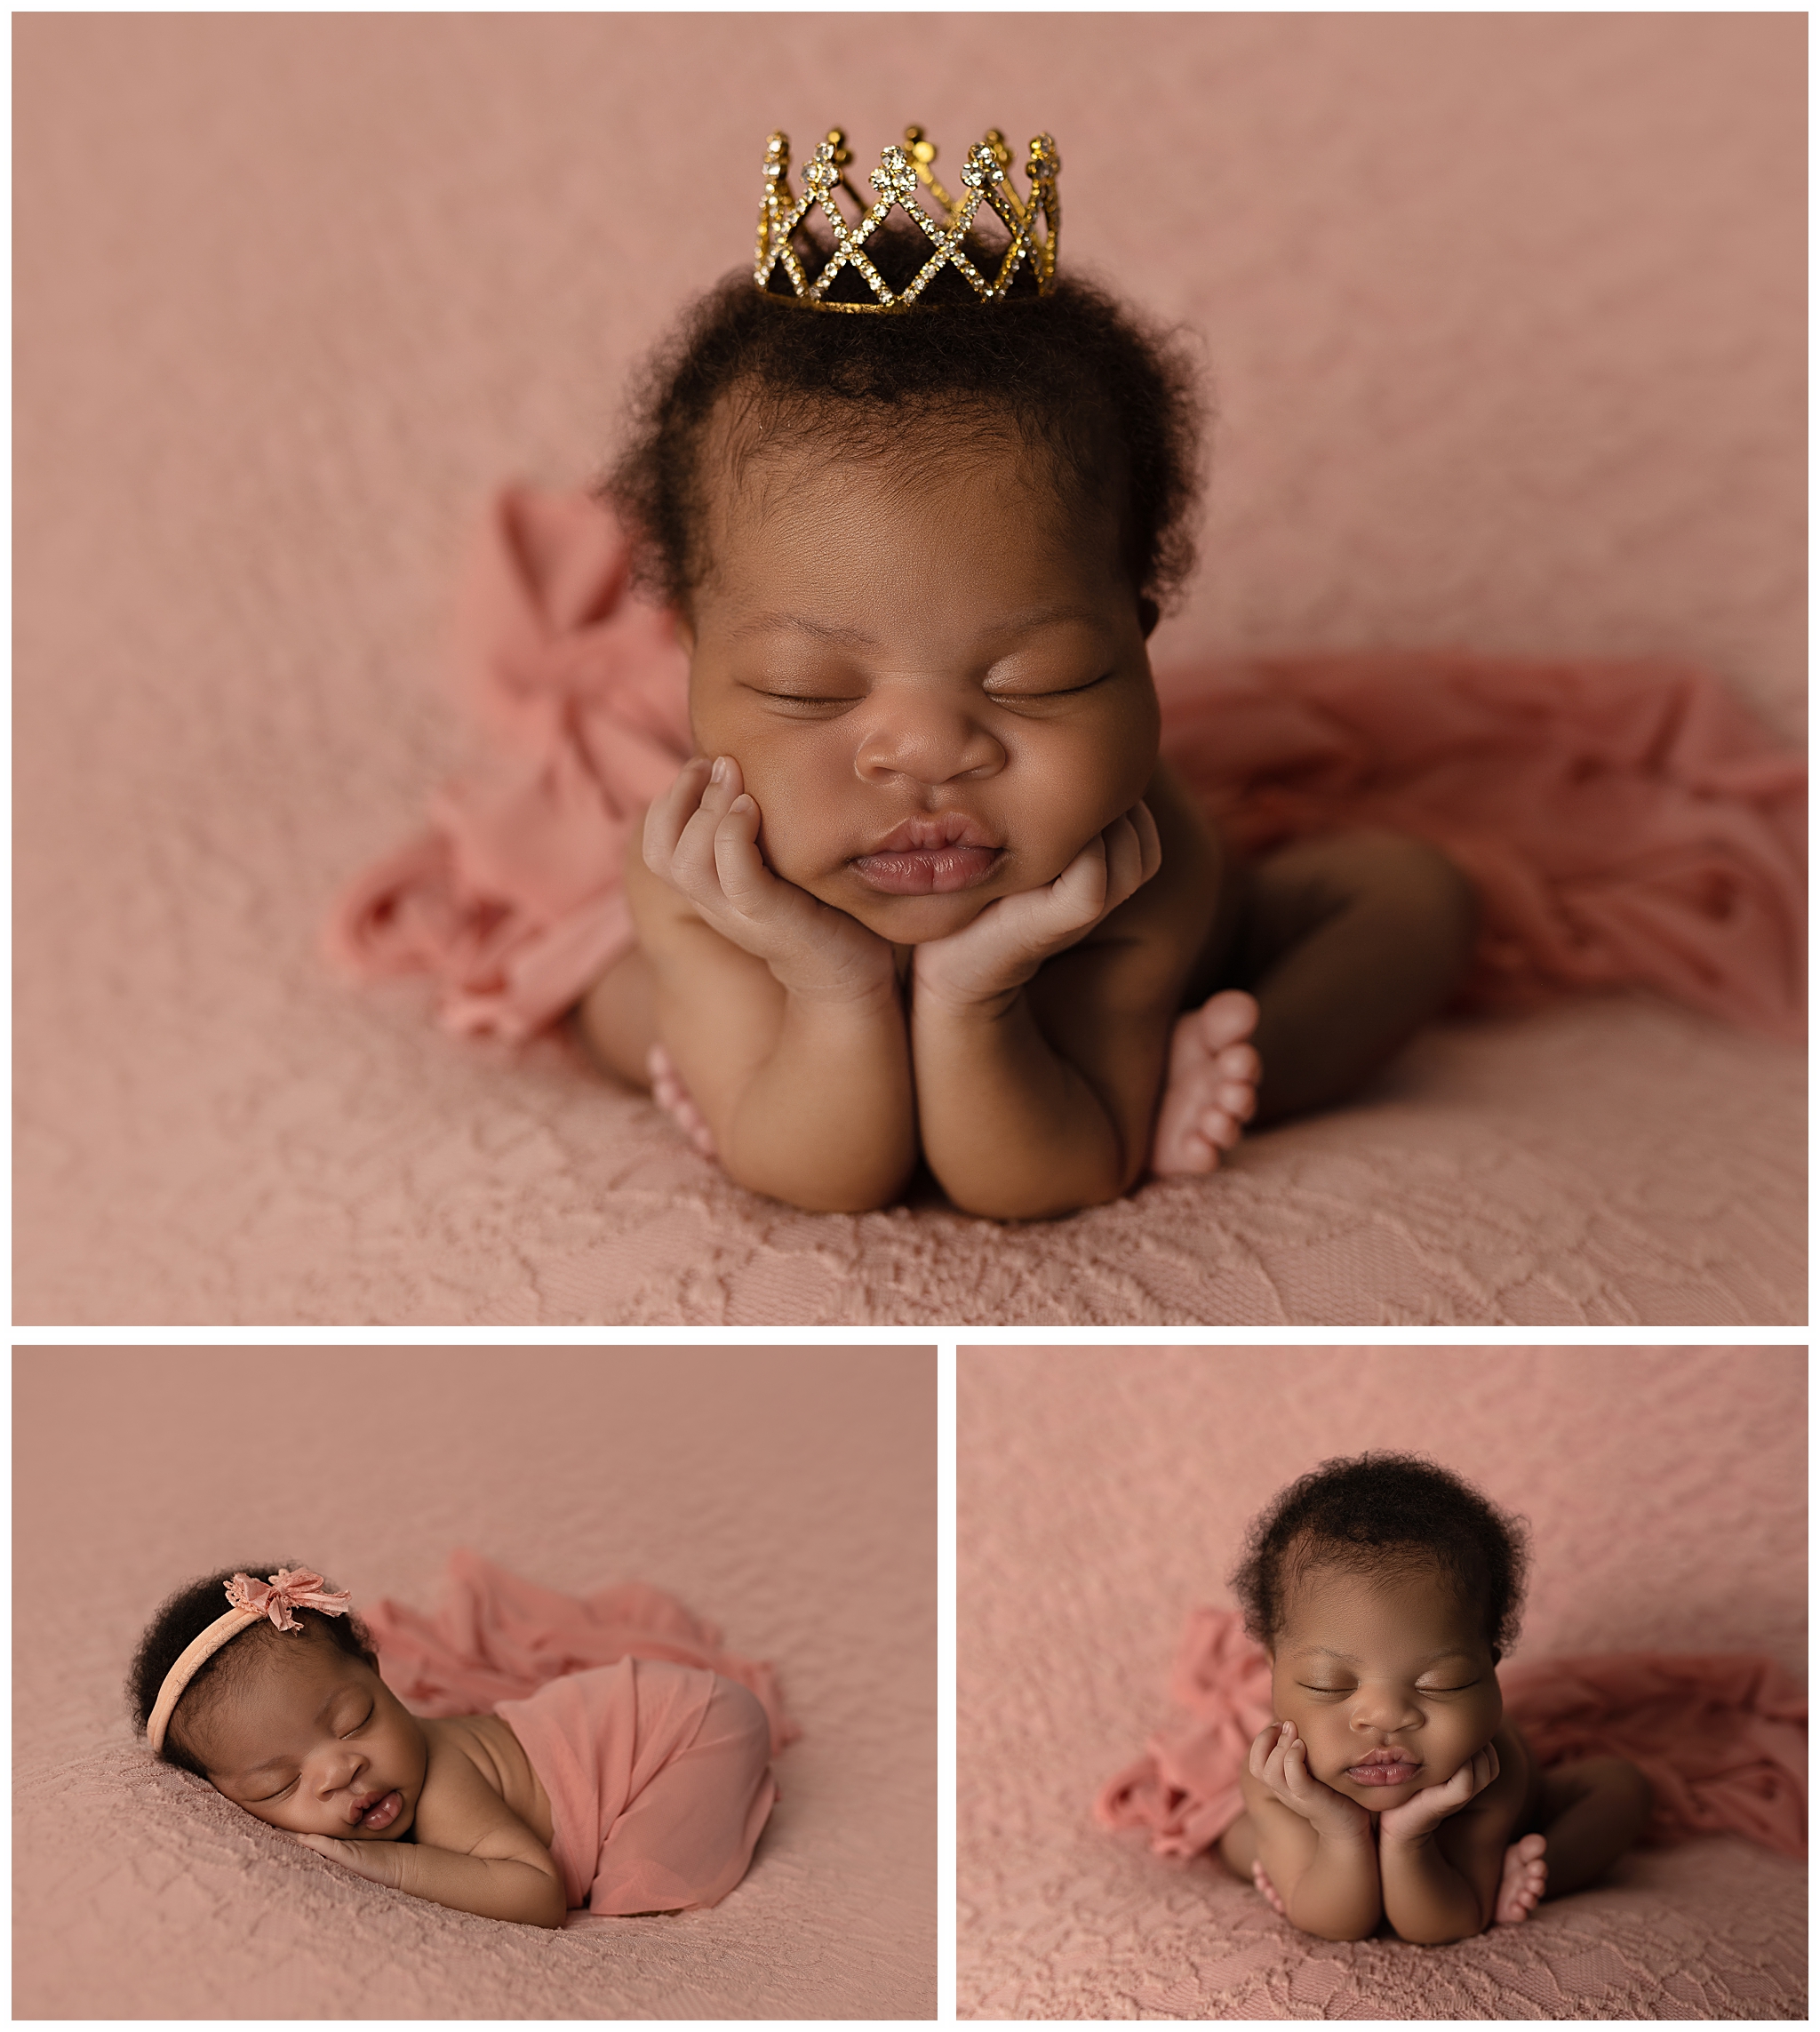 Cute photo montage of three rainbow baby pics featuring a newborn on a pink background. 